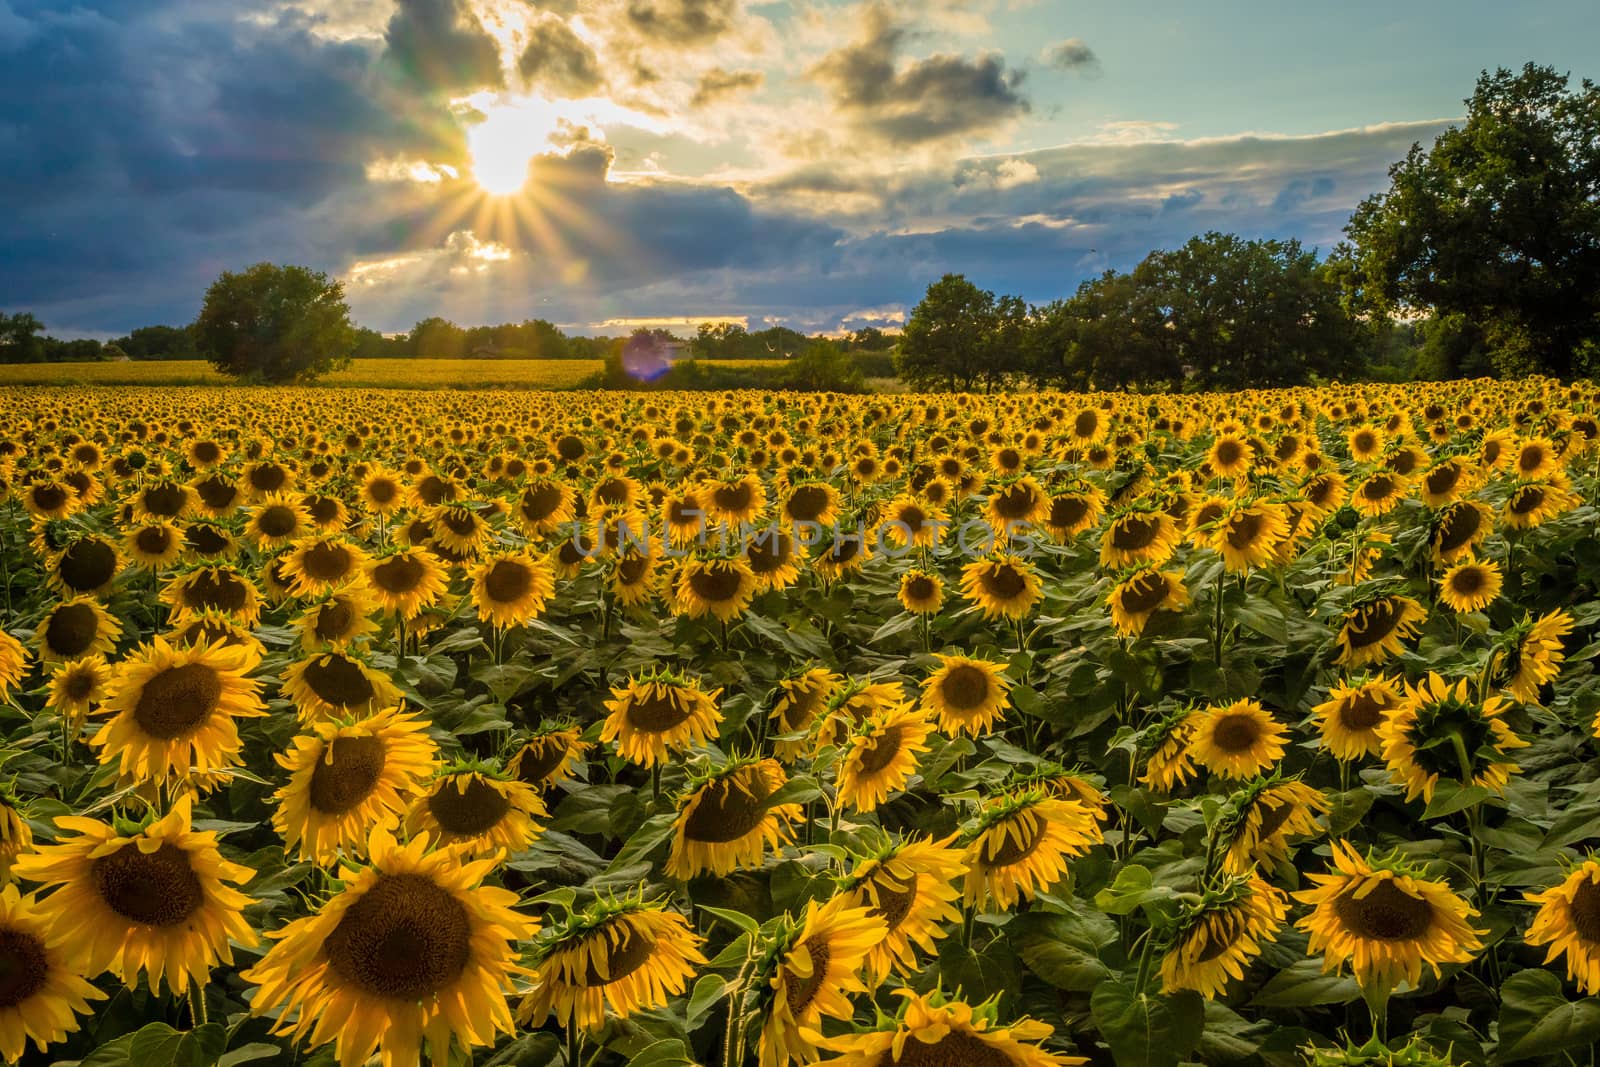 A field of sunflowers backlit while the sun is setting down